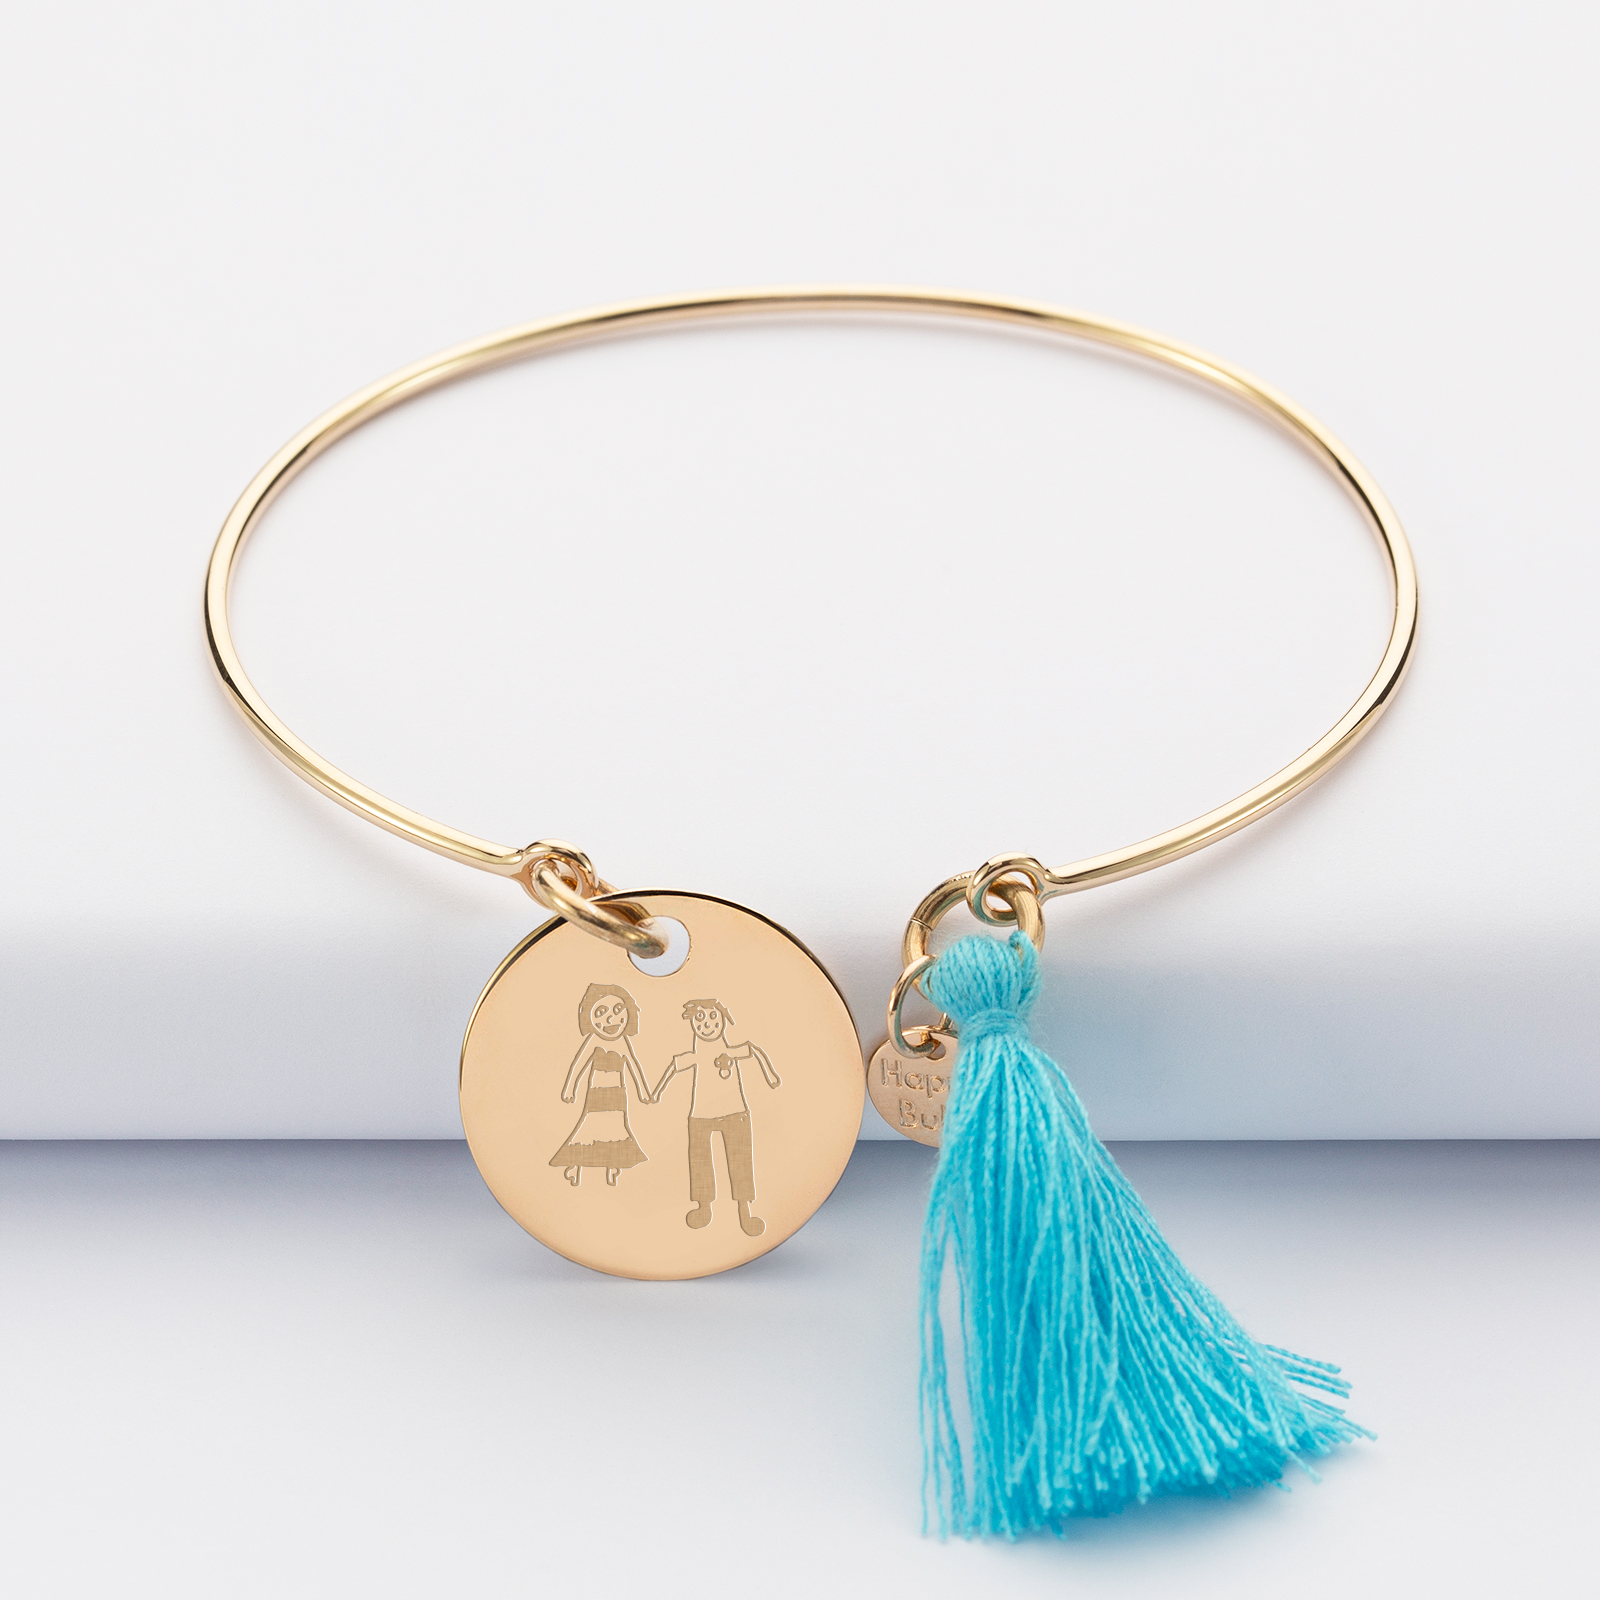 Personalised gold plate bangle with tassel and 19 mm engraved medallion sketch